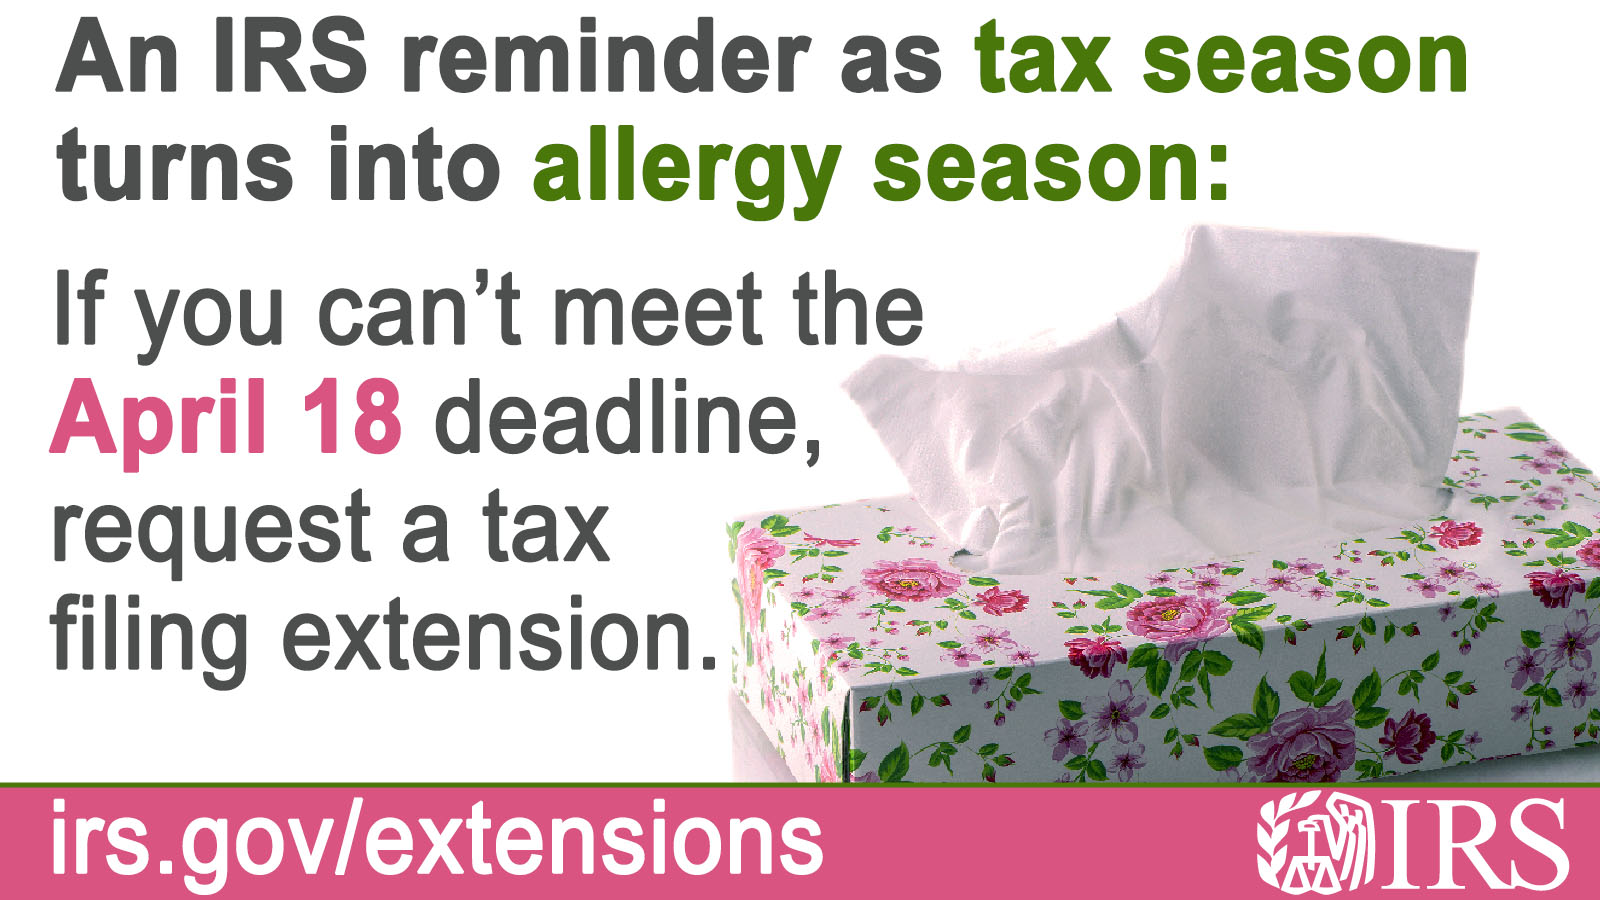 Graphic: a box of tissues printed with small pink flowers. IRS logo. Text: An IRS reminder as tax season turns into allergy season: If you can’t meet the April 18 deadline, request a tax filing extension. irs.gov/extensions